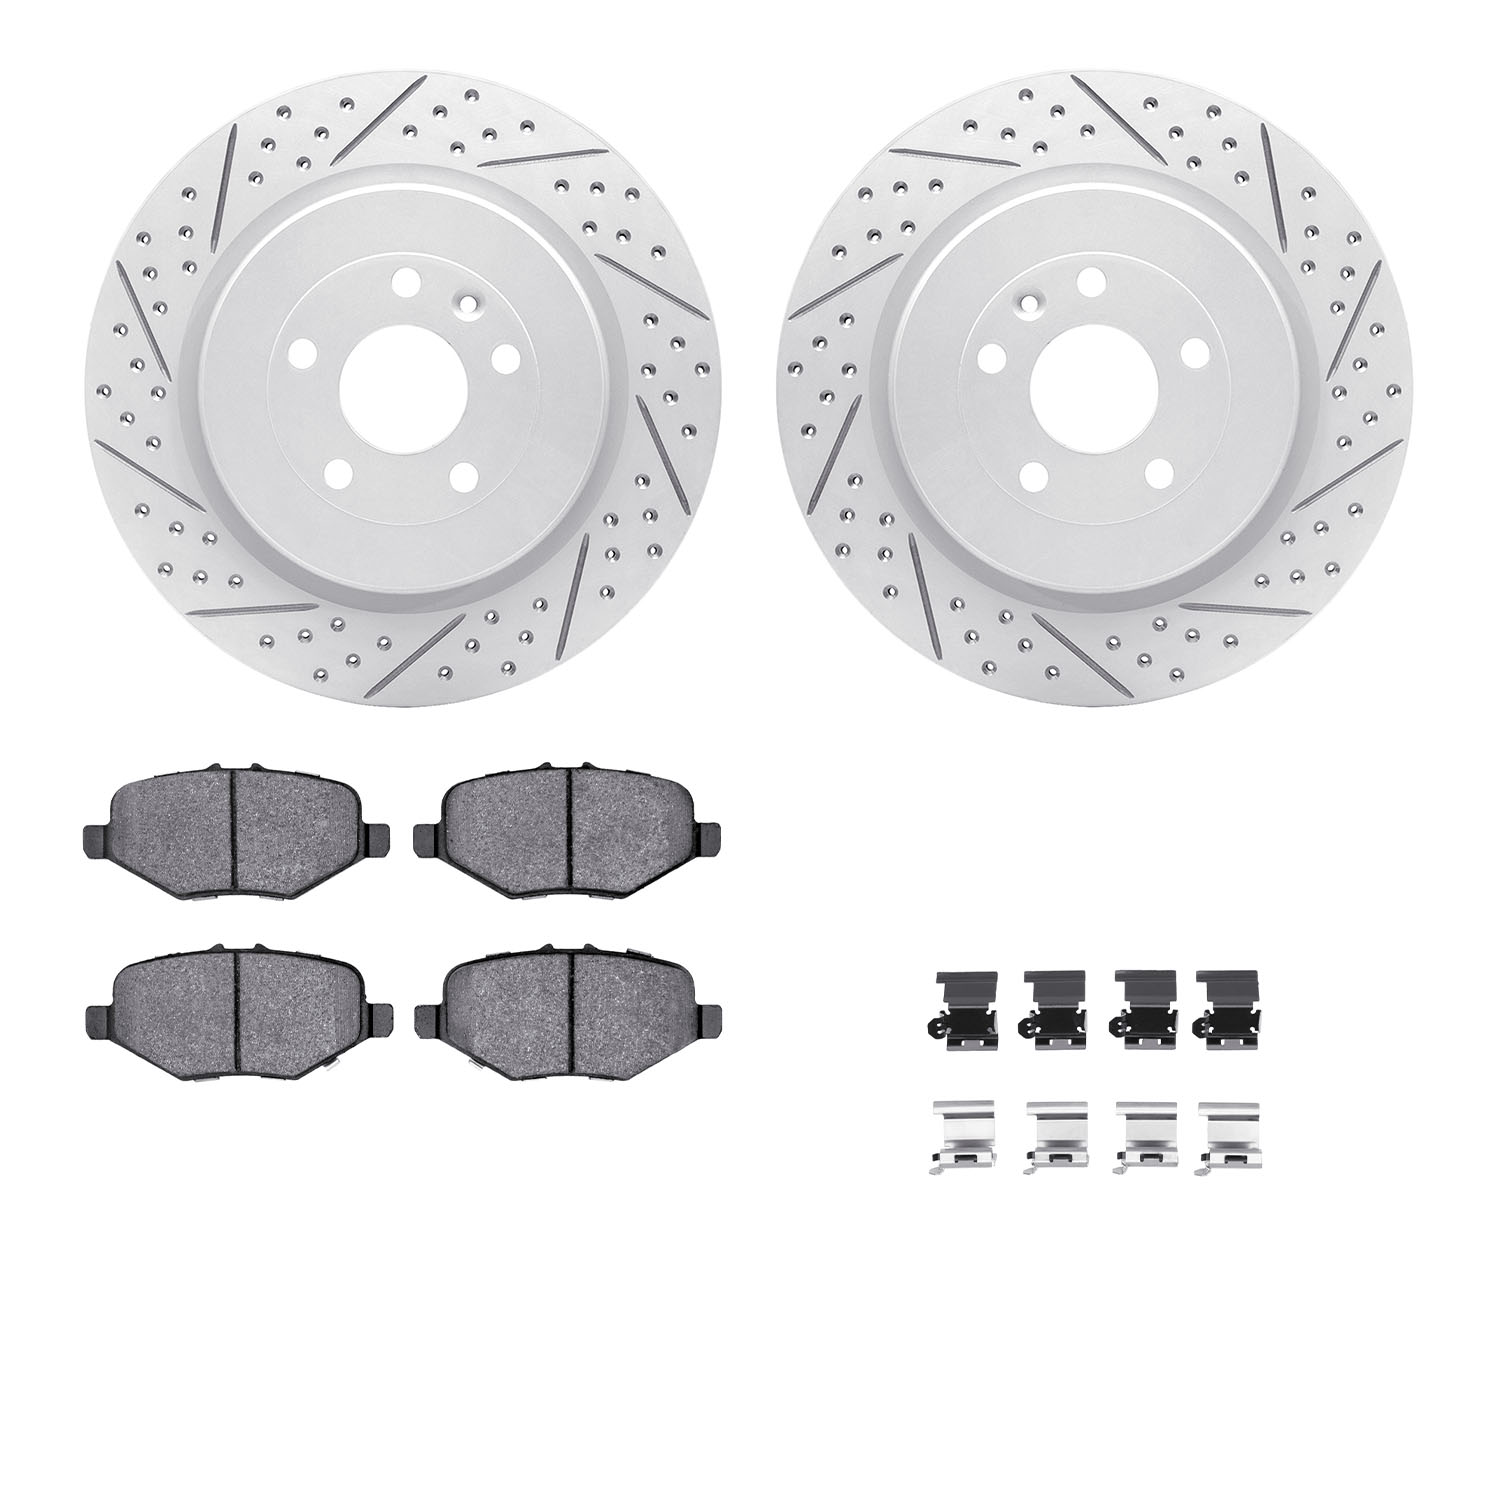 2212-99185 Geoperformance Drilled/Slotted Rotors w/Heavy-Duty Pads Kit & Hardware, 2013-2019 Ford/Lincoln/Mercury/Mazda, Positio